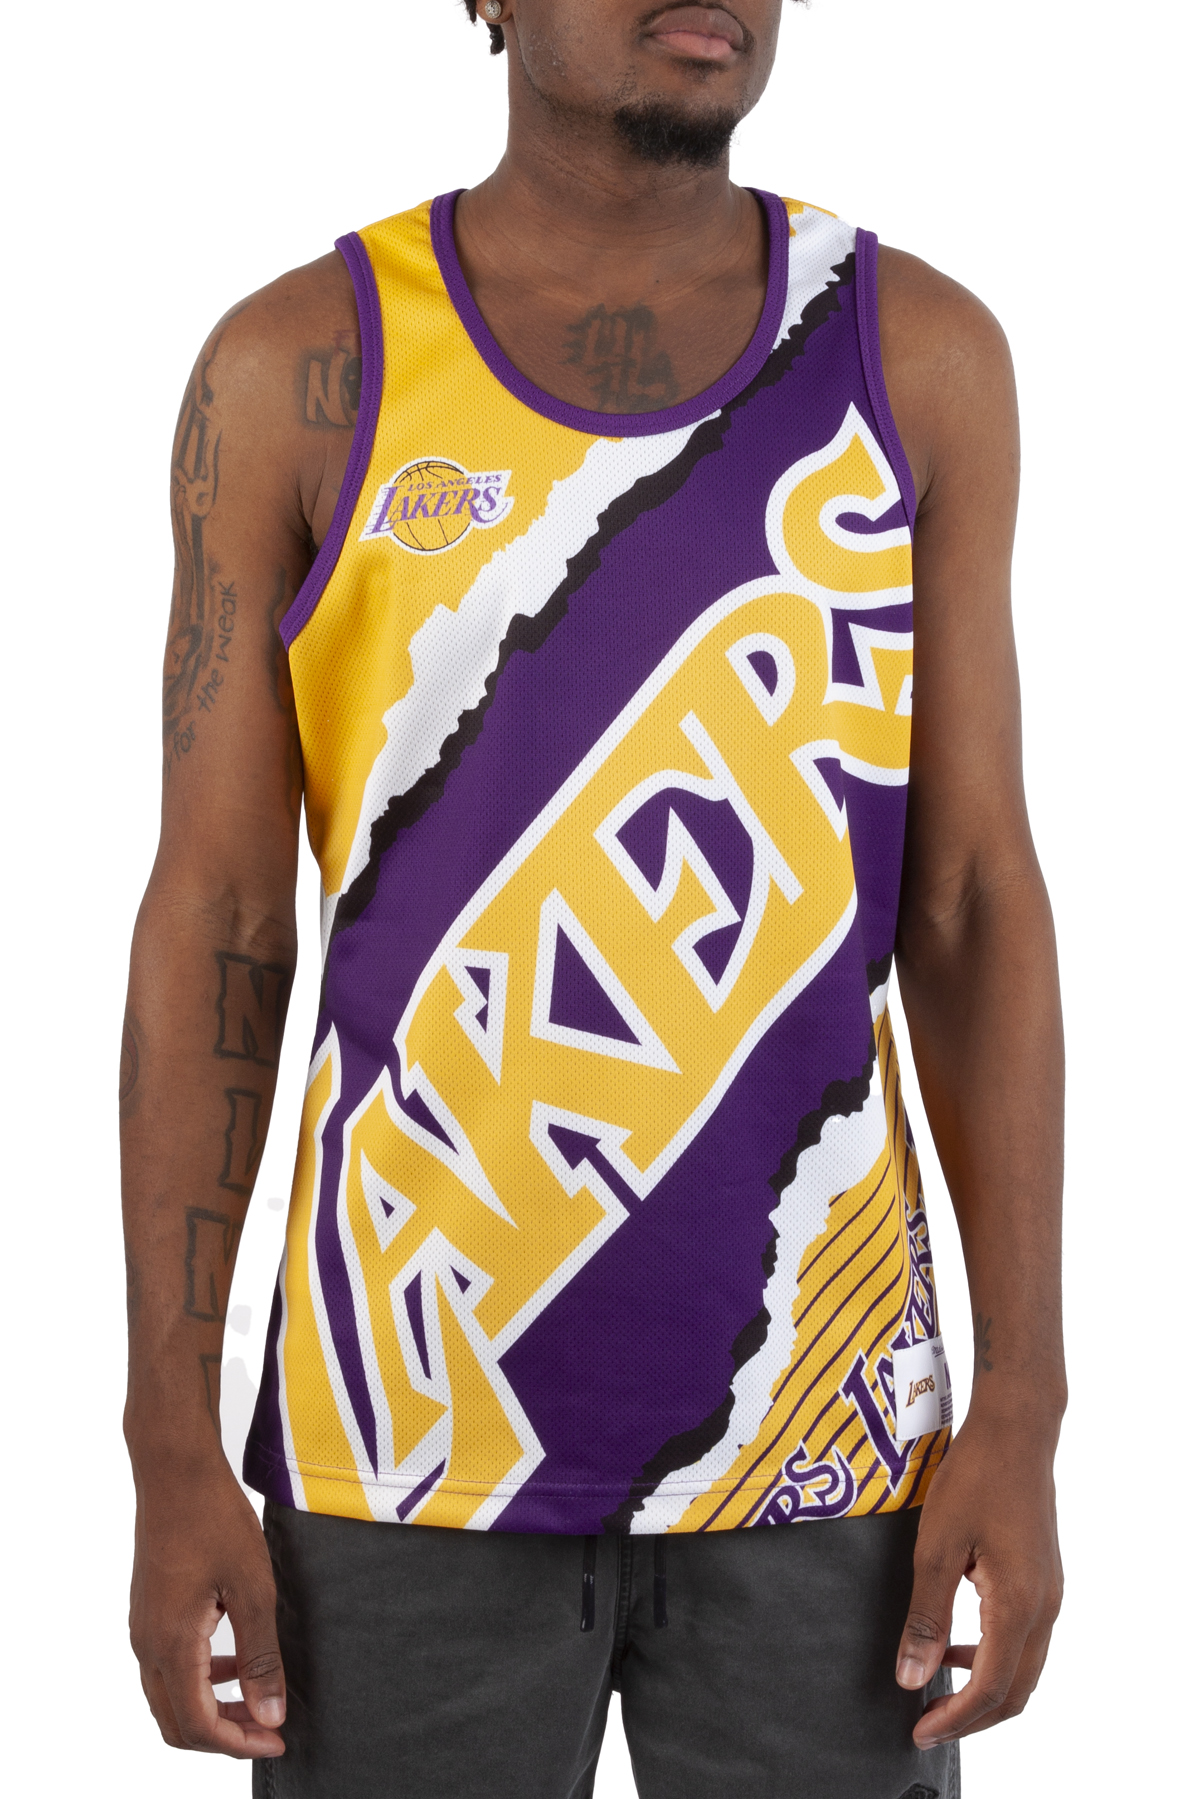 Dres Mitchell & Ness tank top Los Angeles Lakers purple Big Face